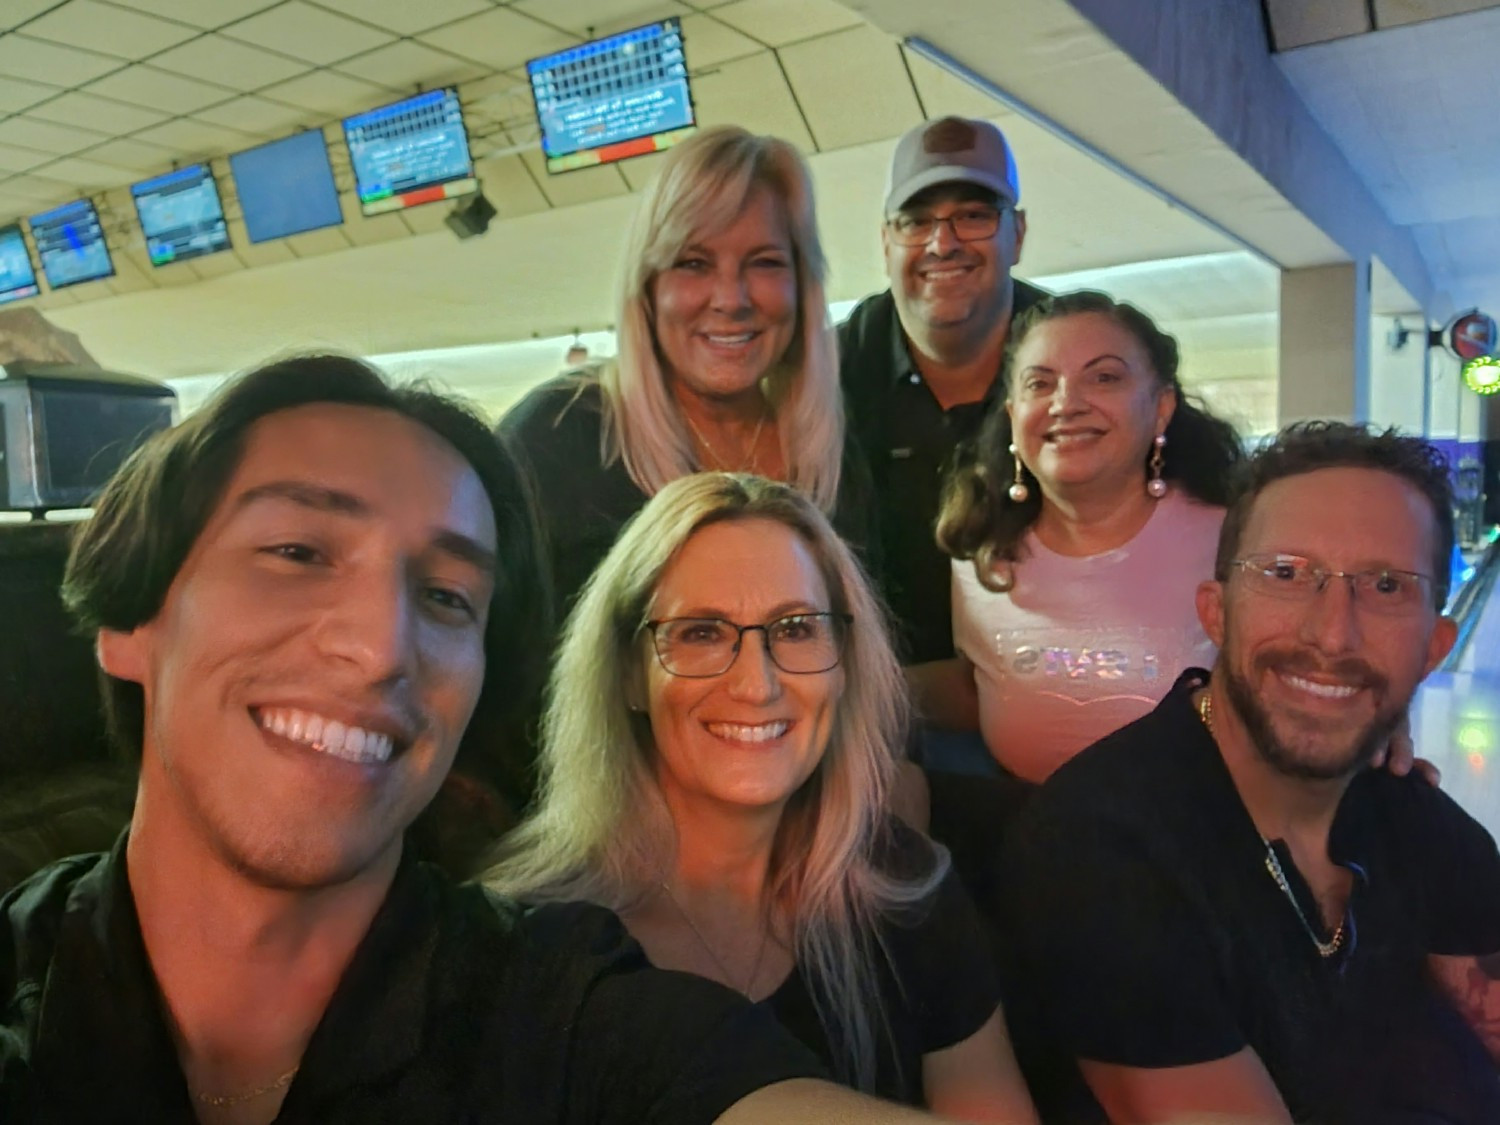 Stearns Bank team members at a team building event - bowling!